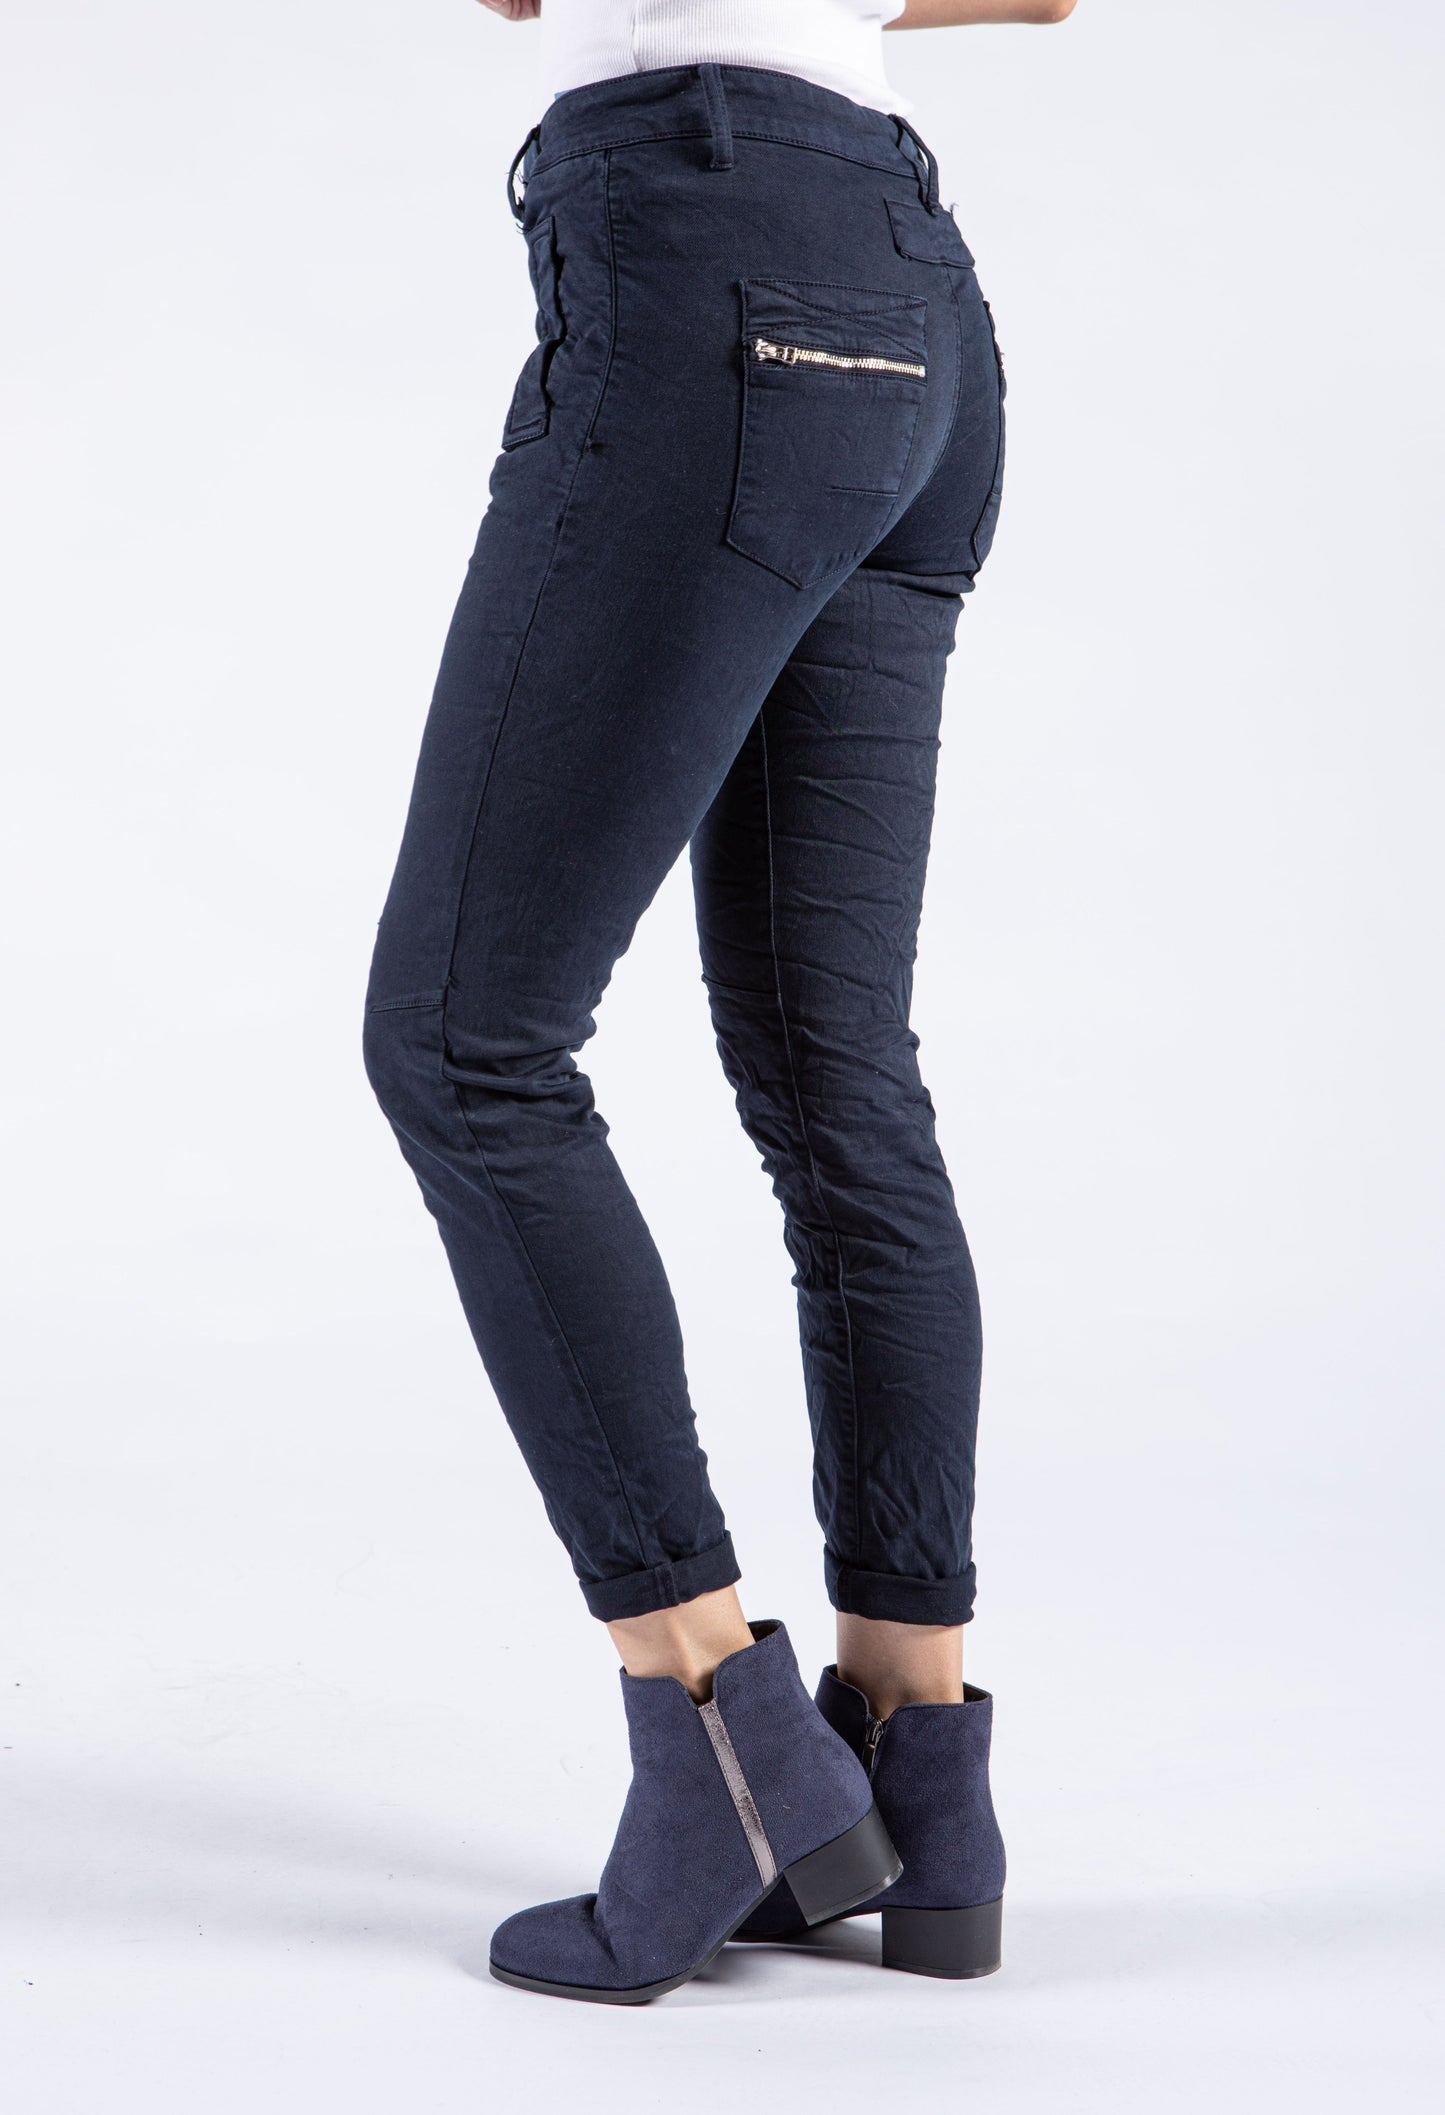 Crinkle Style Jeans